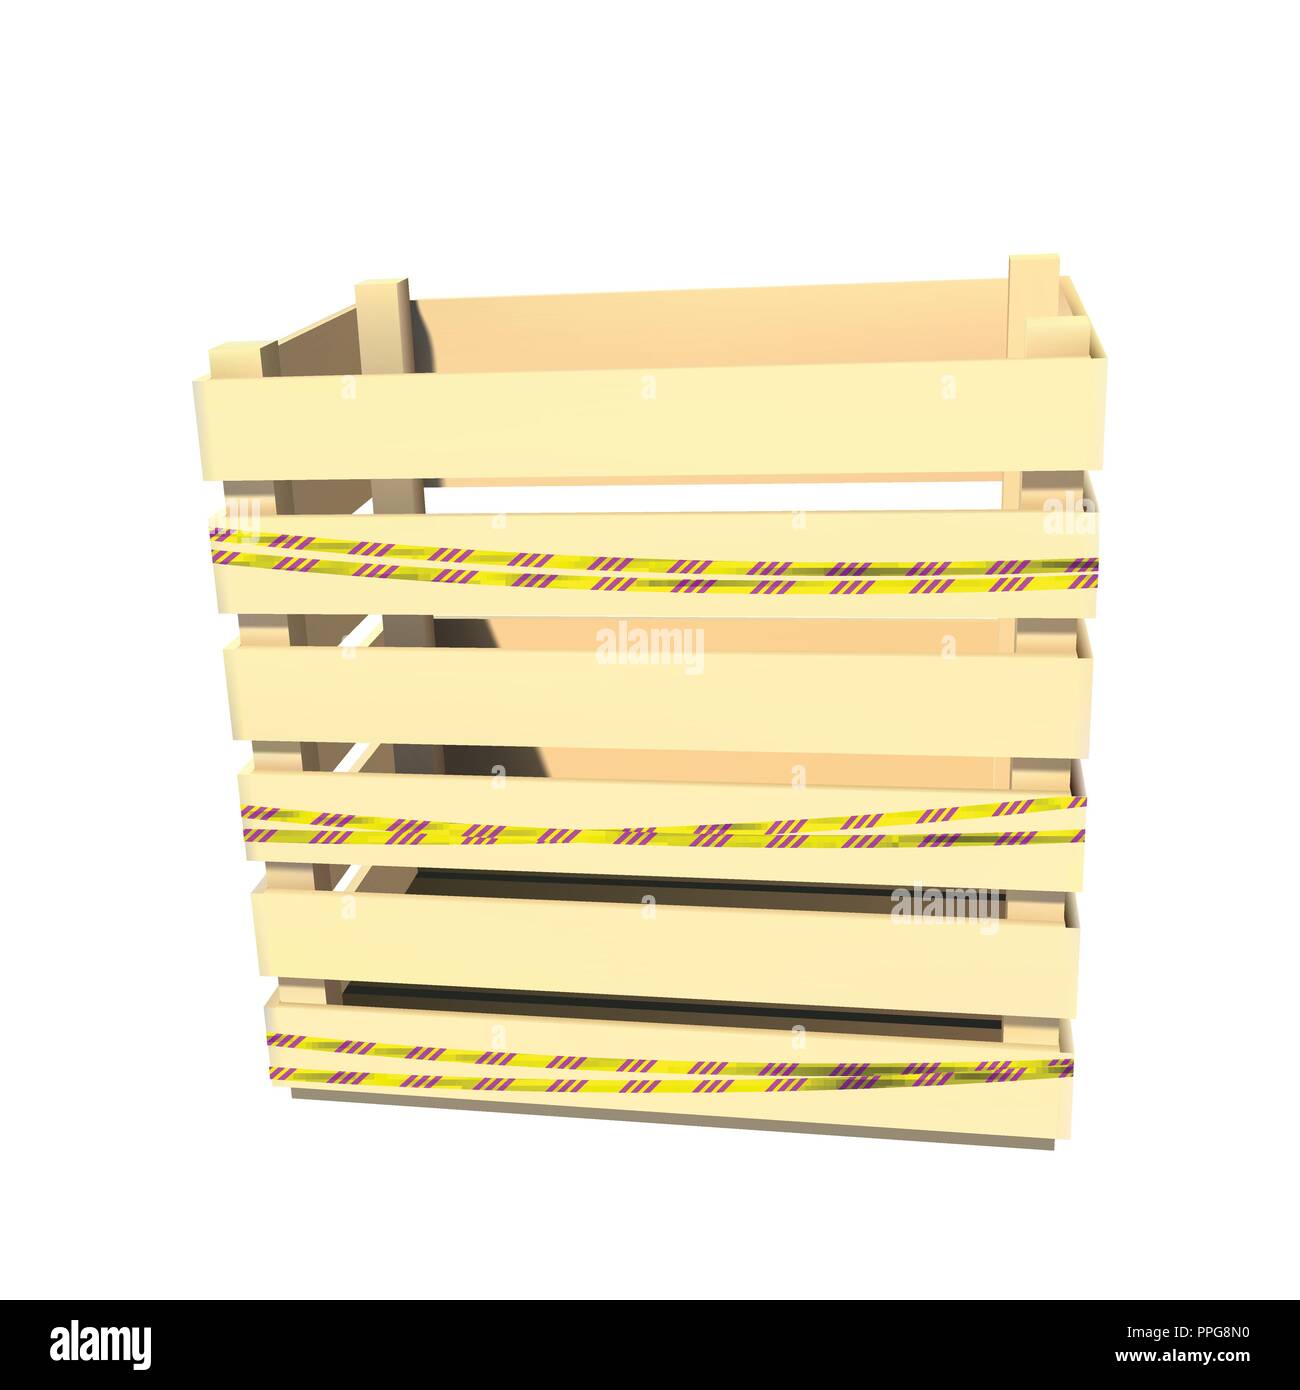 Radiation hazards. Caution tape. Wooden container. Box for storage and transportation. Vector illustration. Stock Vector